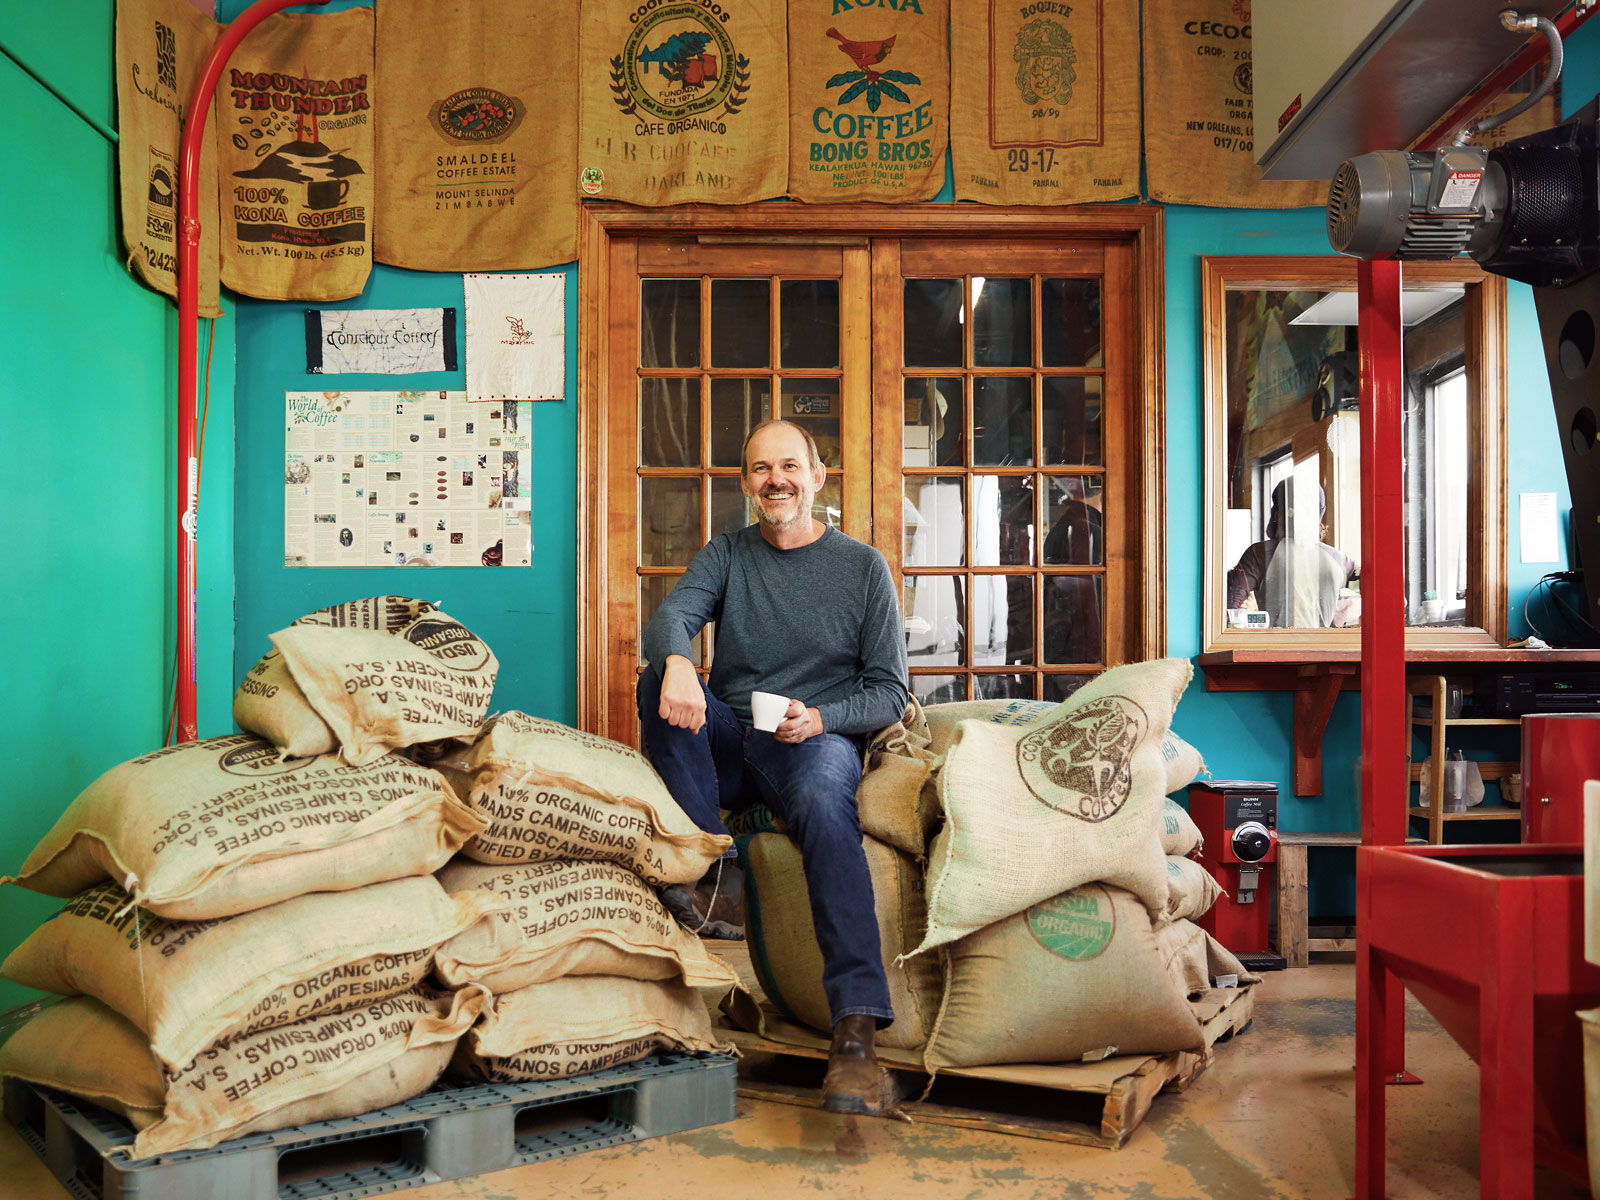 The owner of Conscious Coffees sitting on a stack of burlap bags of coffee beans